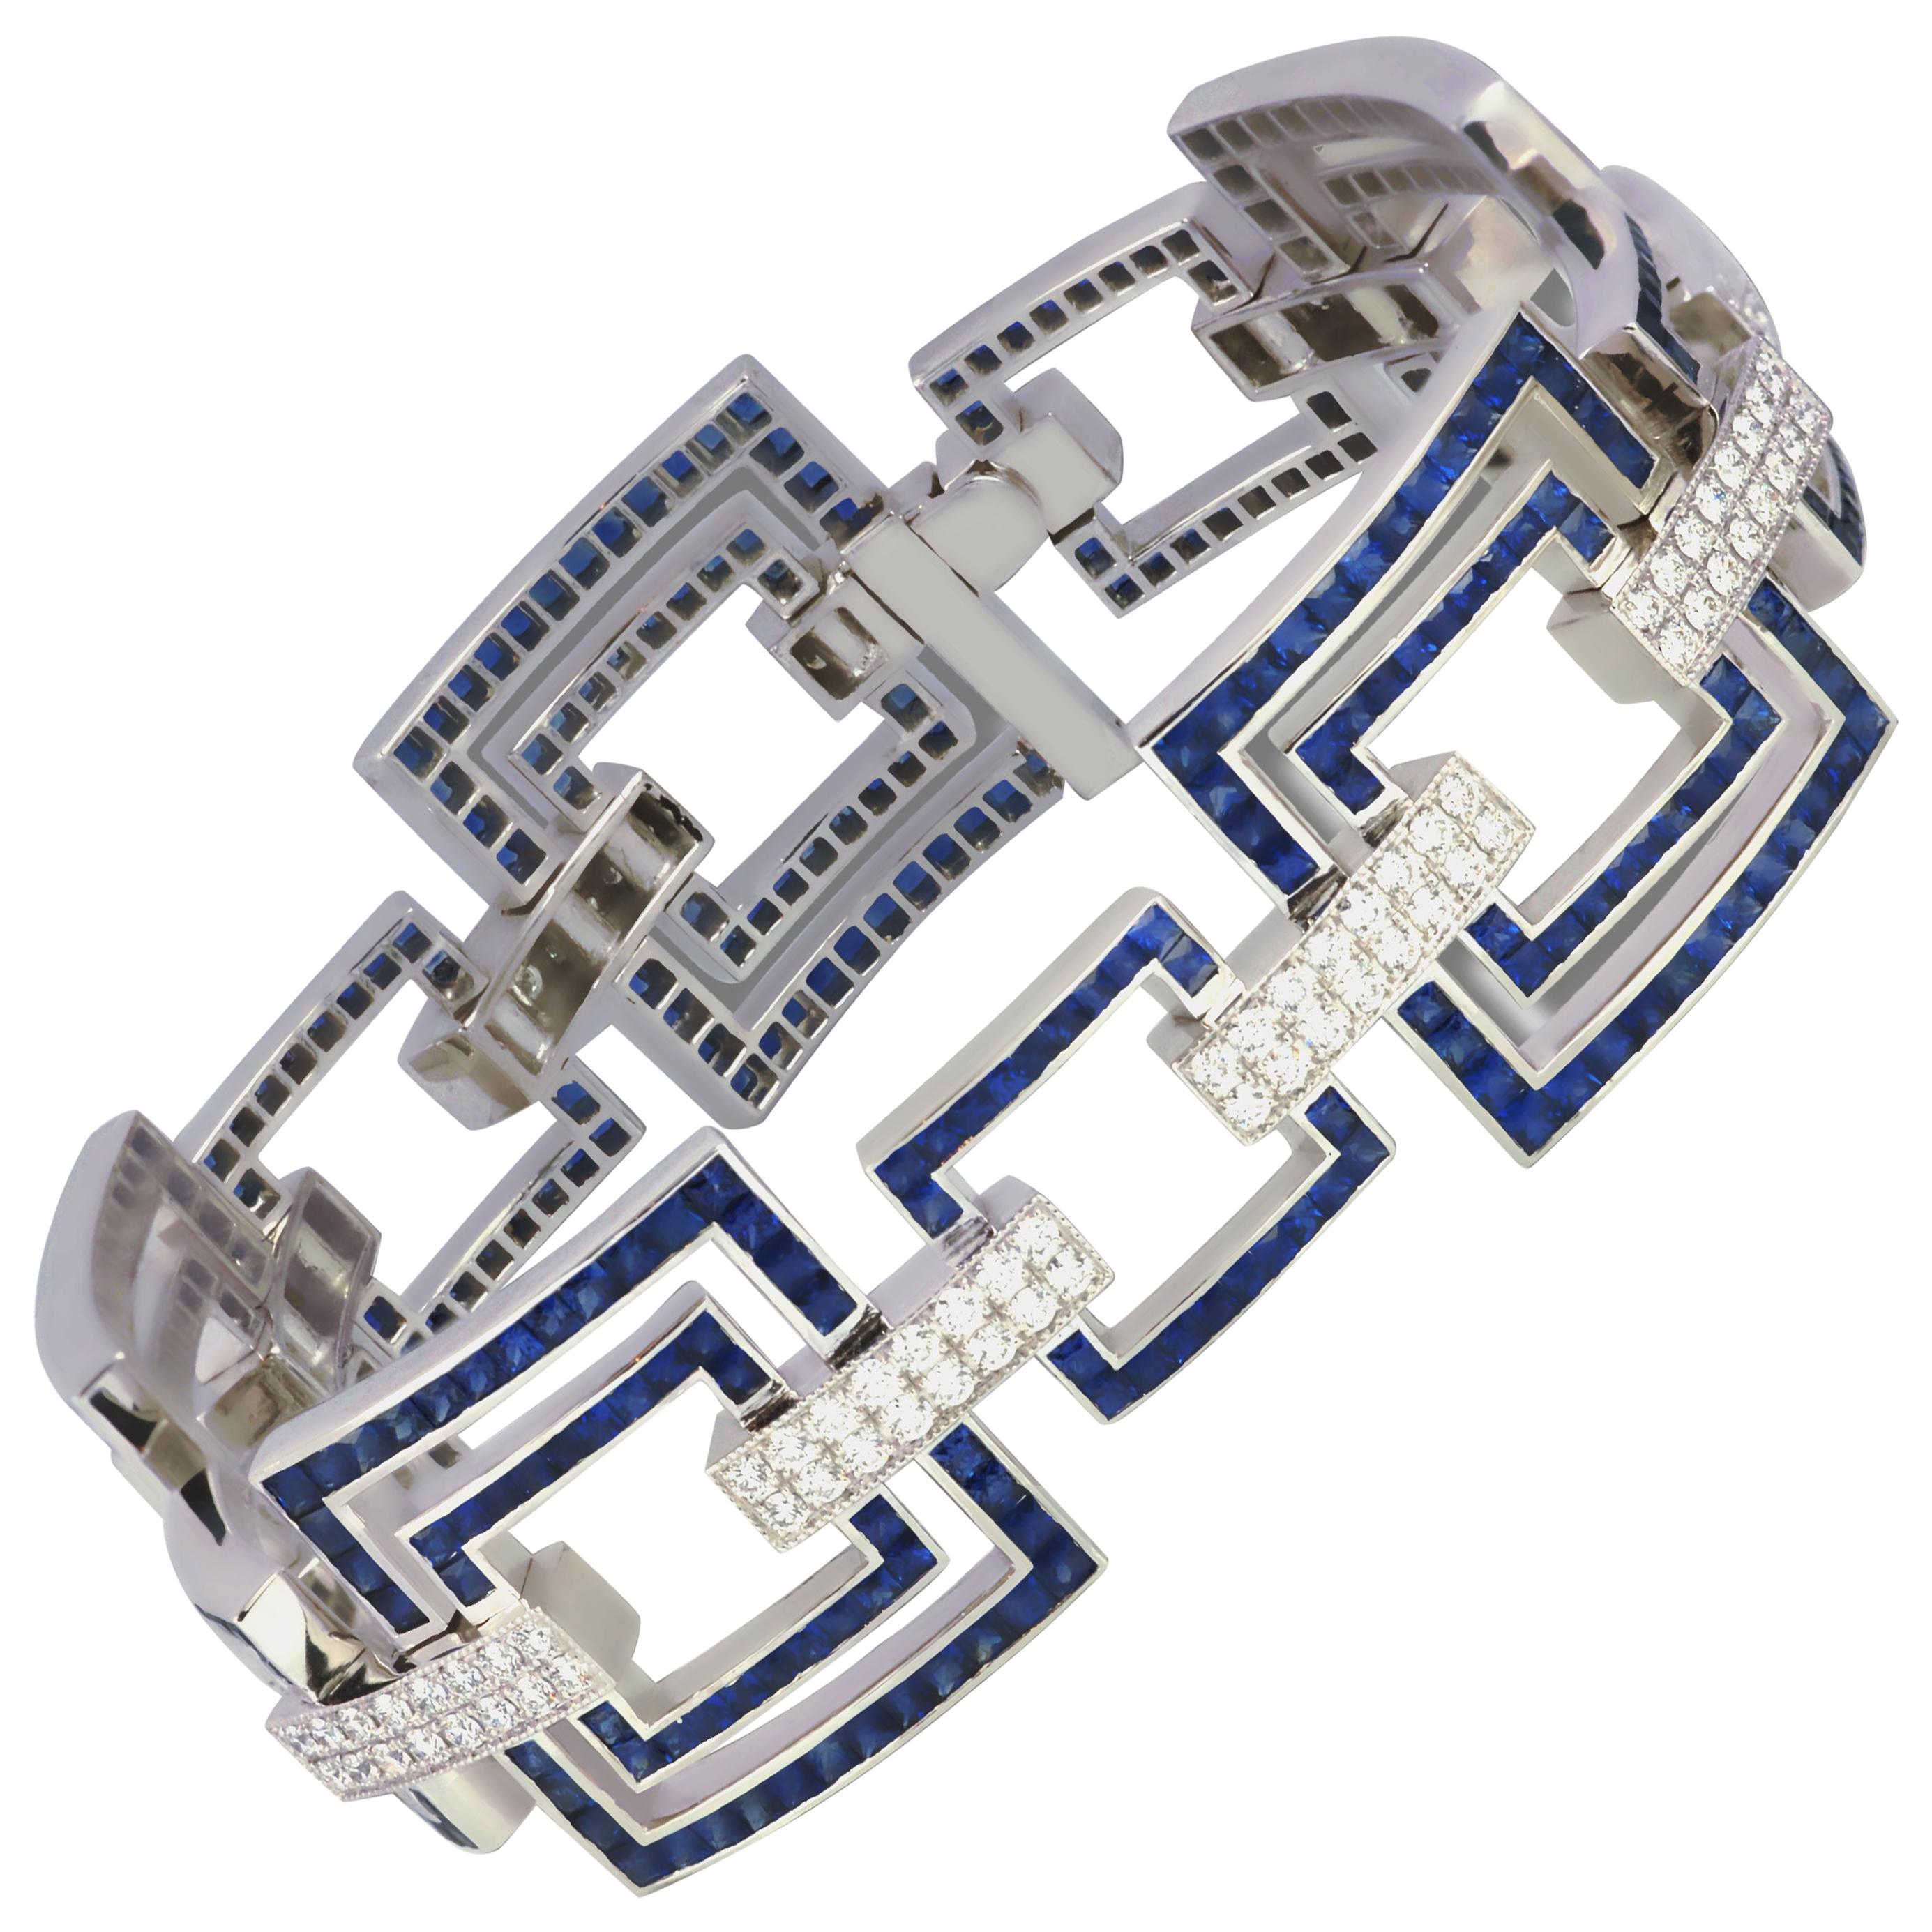 Blue Sapphire 13.43 Cts with Diamond 2.13 Cts Bracelet in 18k White Gold Setting For Sale